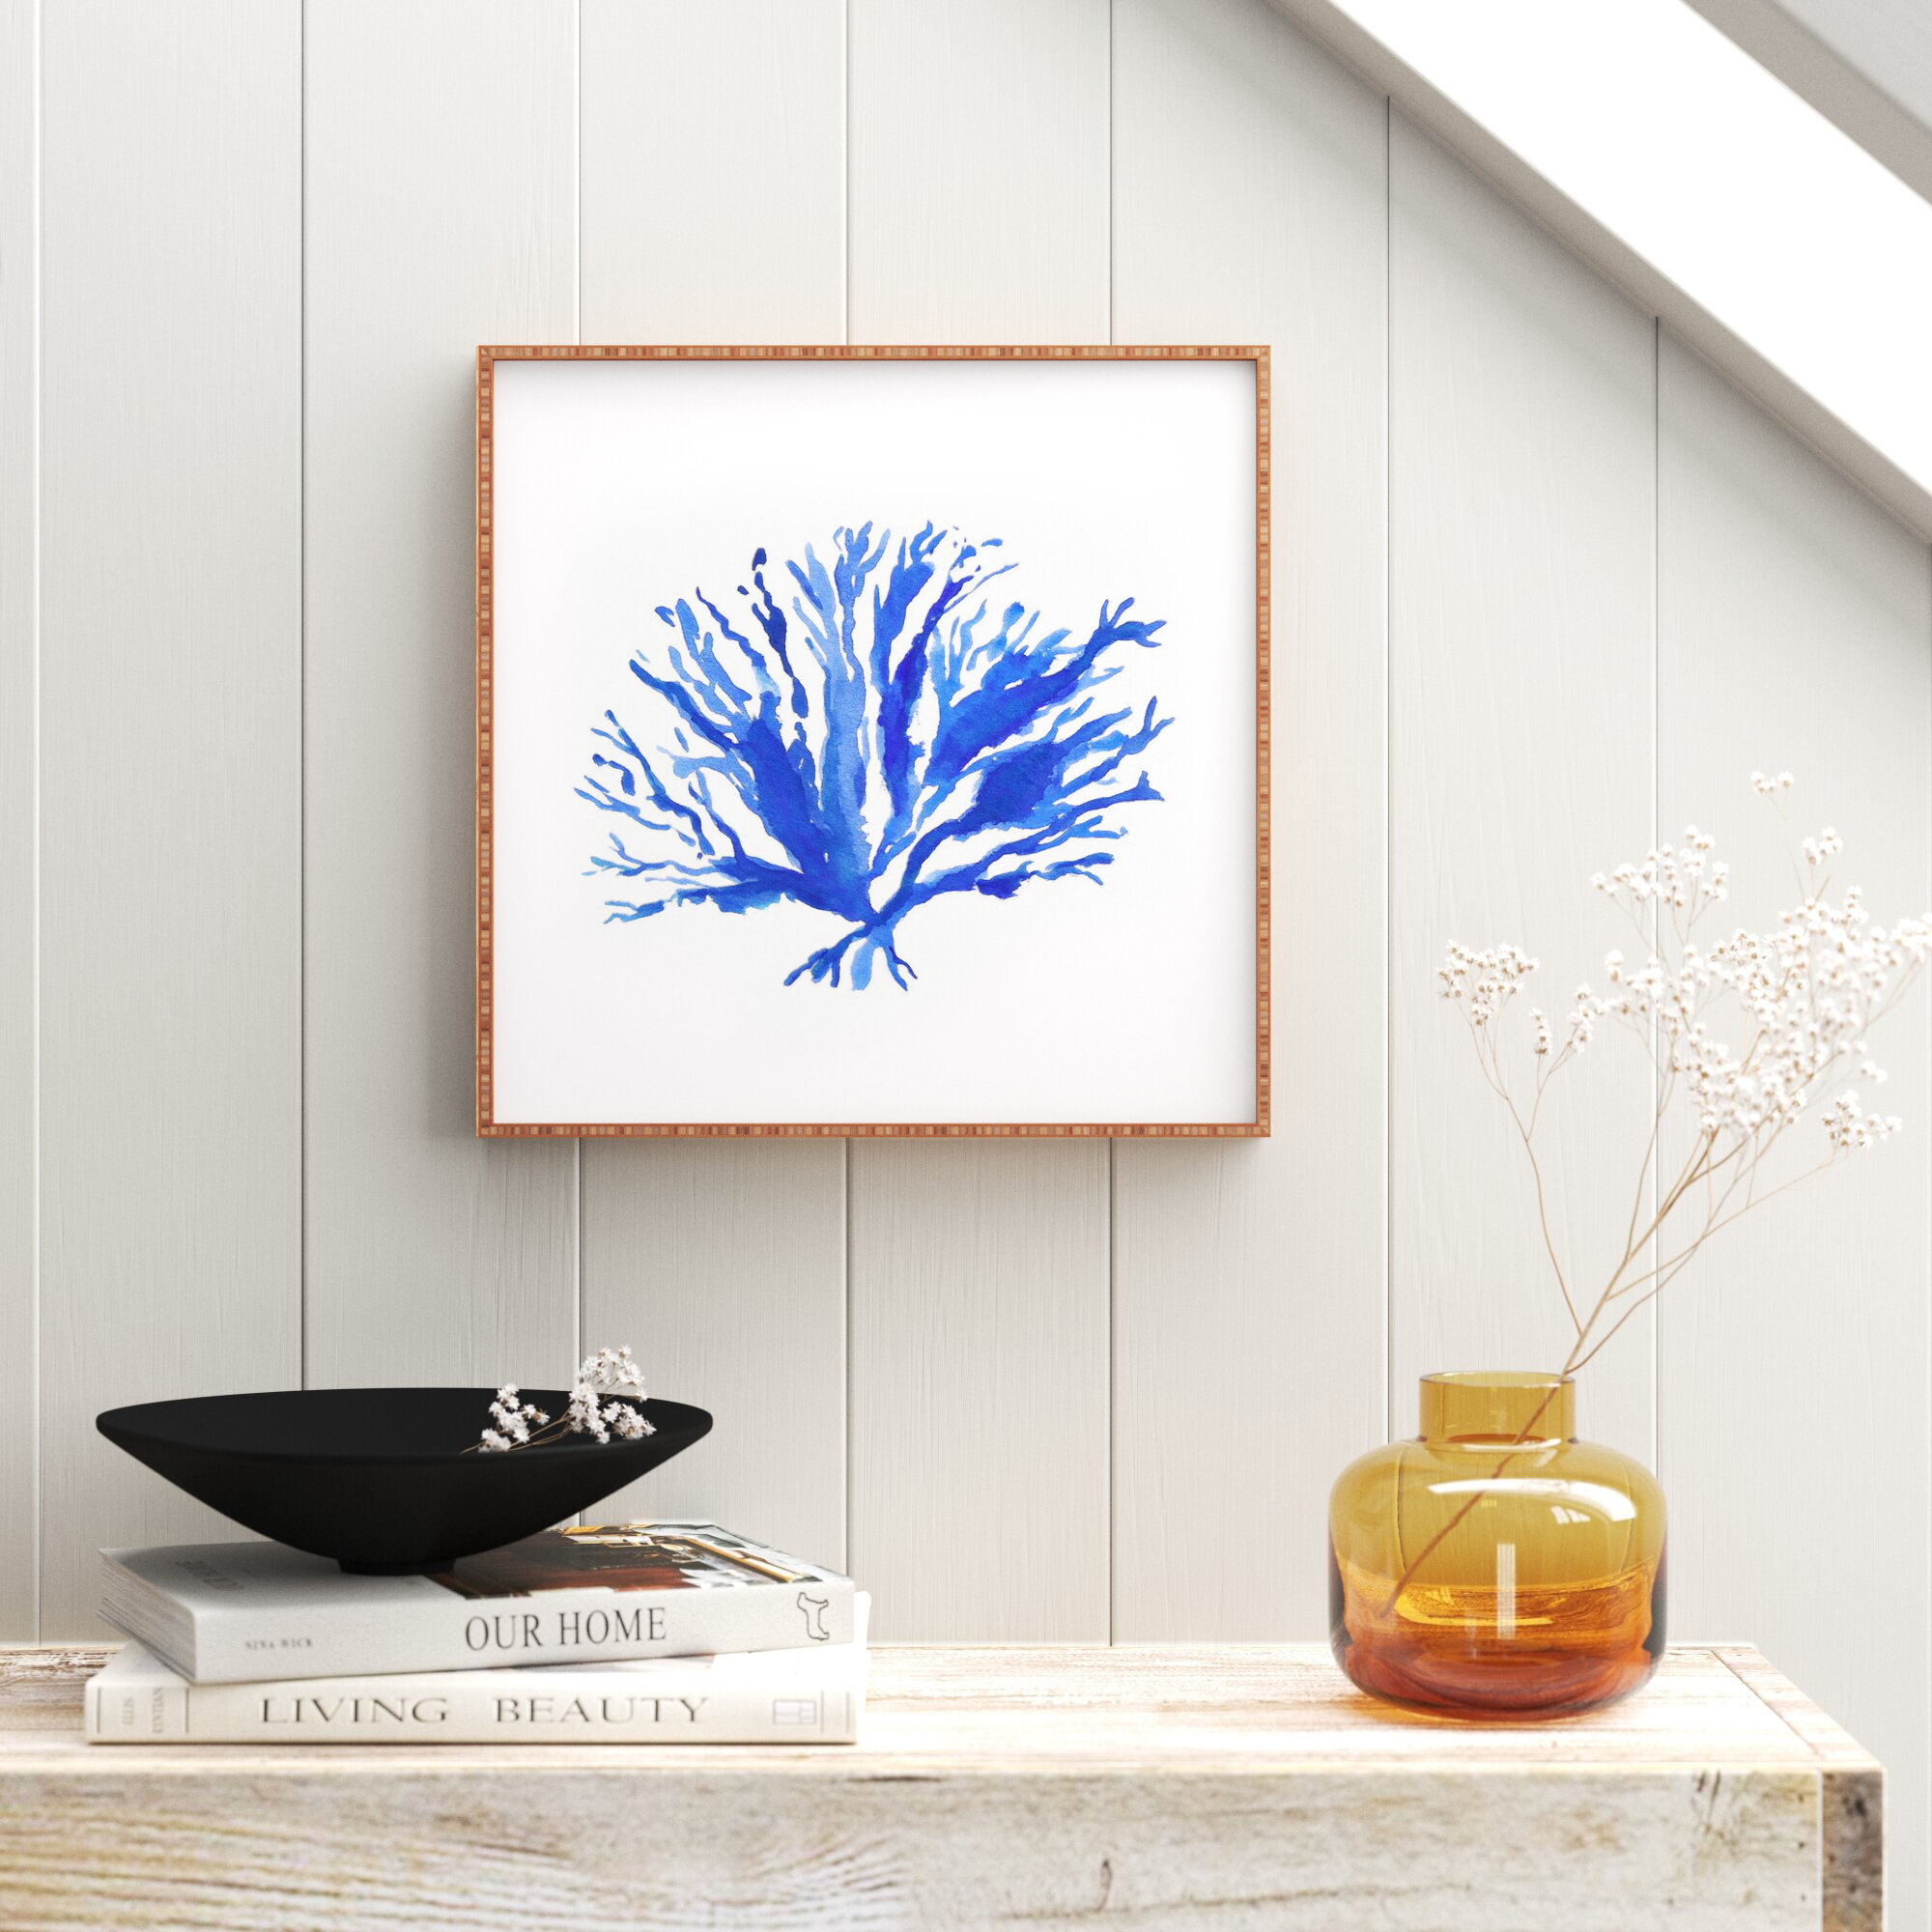 Dovecove Sea Coral Framed On Wood by Laura Trevey Print & Reviews